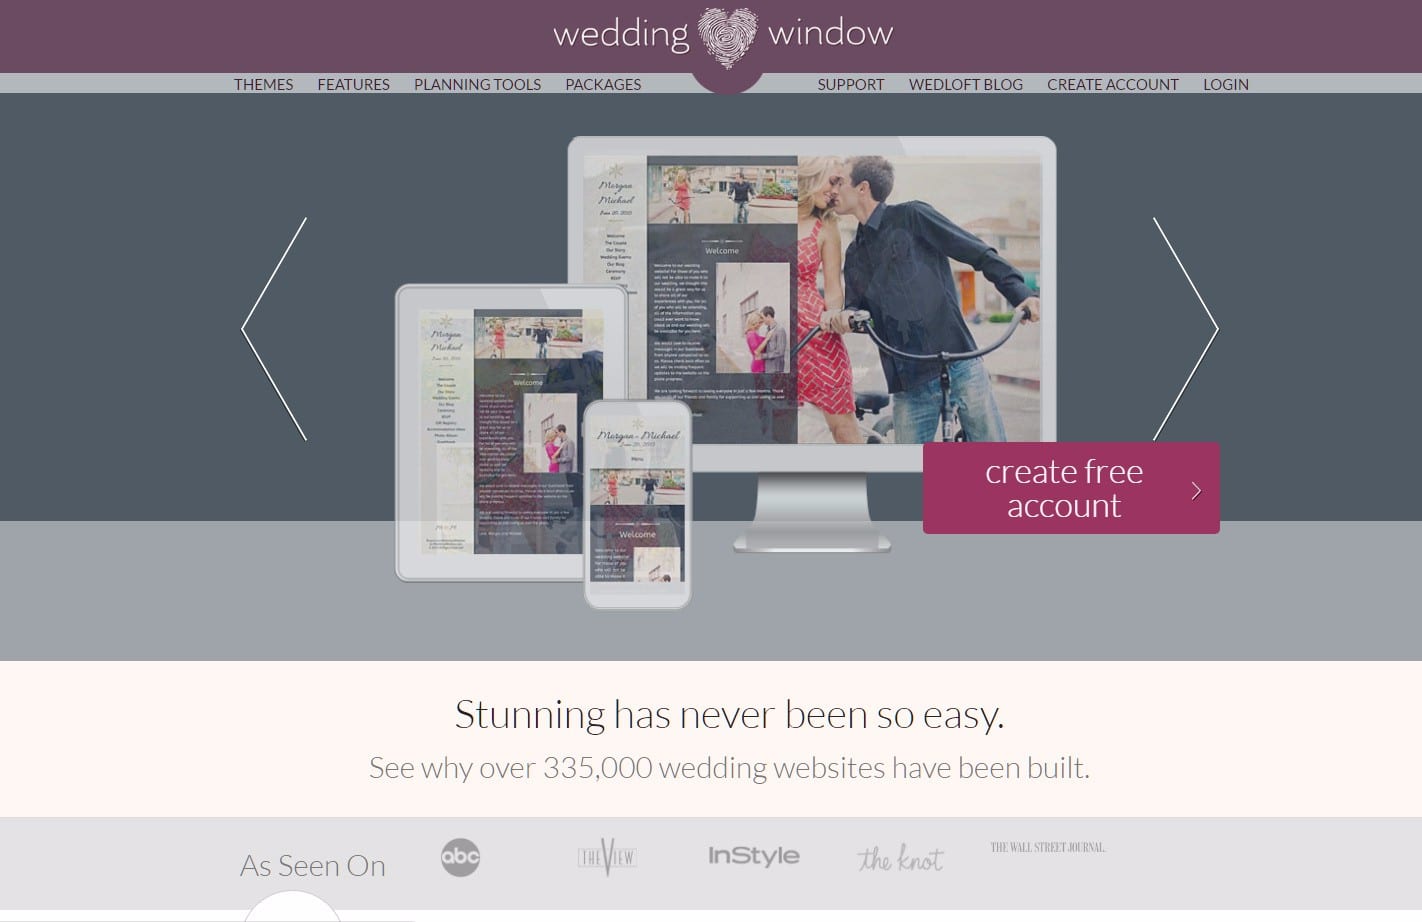 Free Custom Wedding Websites WeddingWindow.com Google Chrome 4282017 83614 PM.bmp Seattle and Snohomish Wedding and Engagement Photography by GSquared Weddings Photography